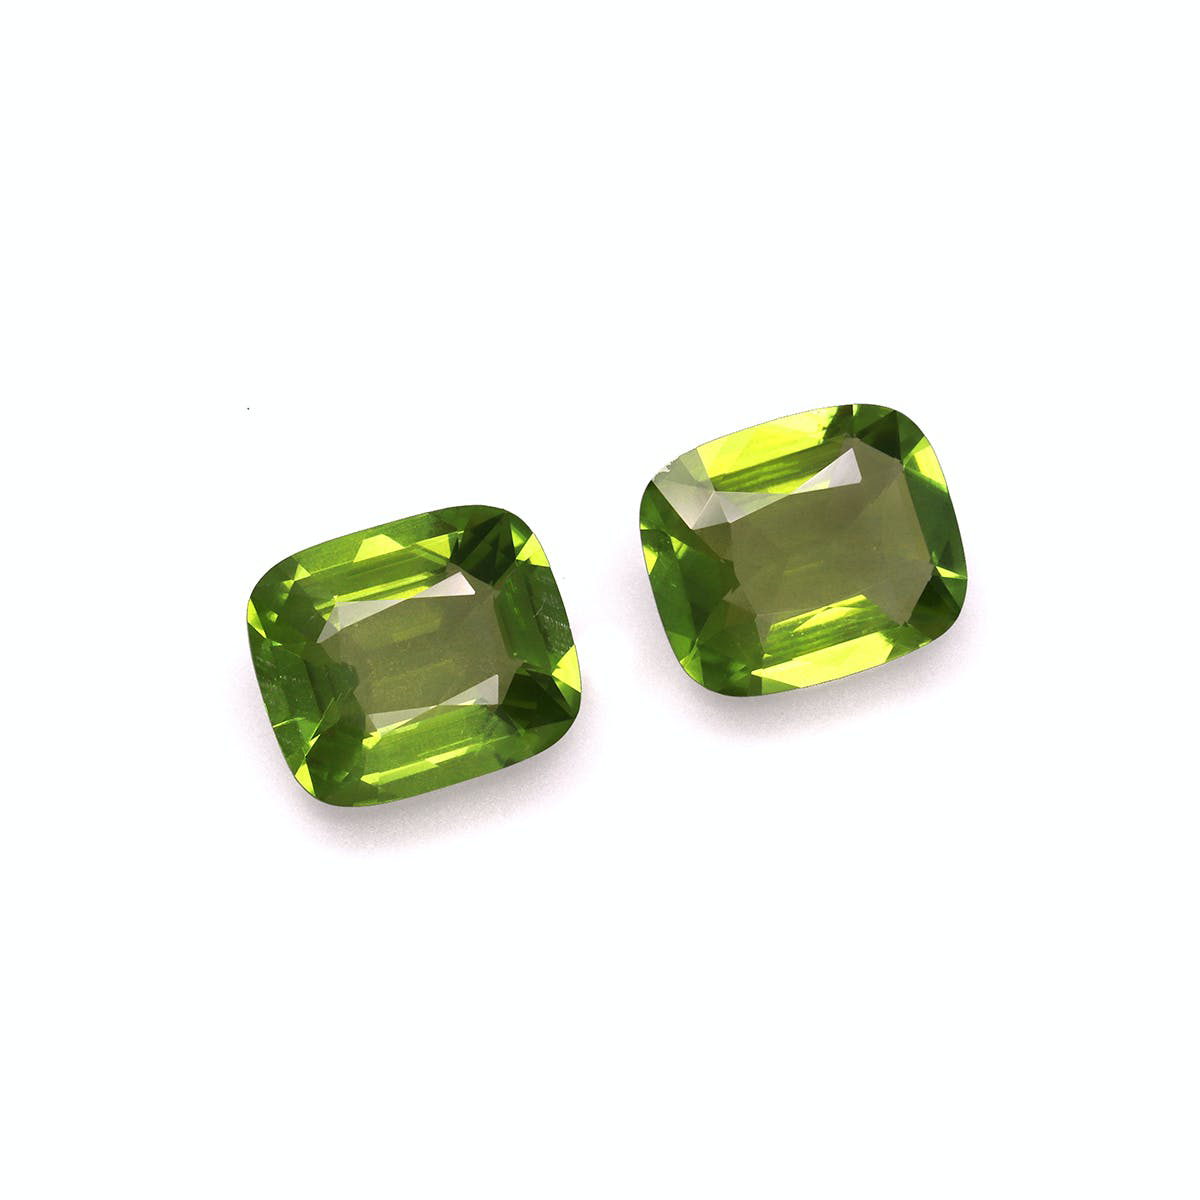 Picture of Pistachio Green Peridot 9.75ct - 12x10mm Pair (PD0168)